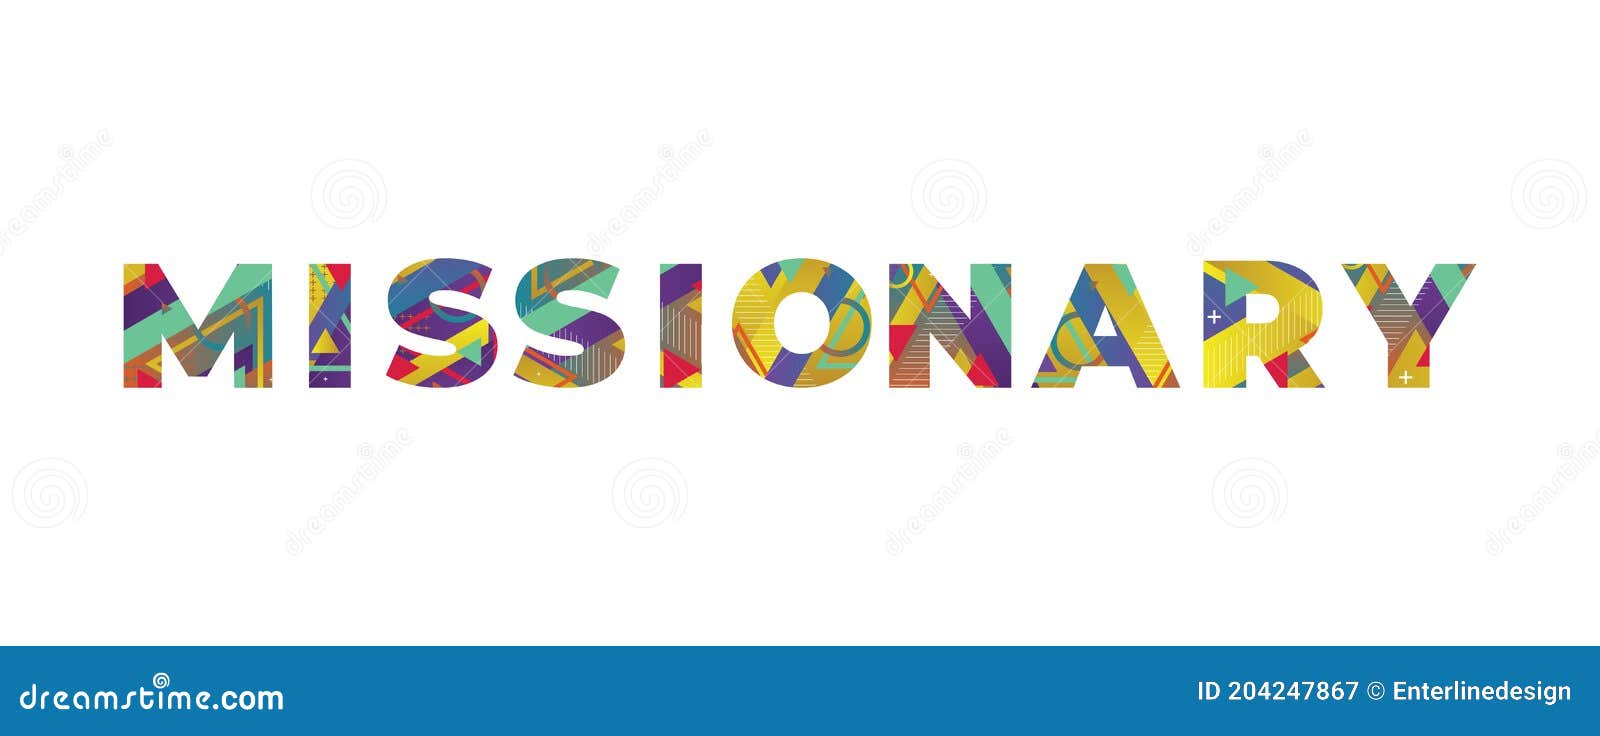 missionary concept retro colorful word art 